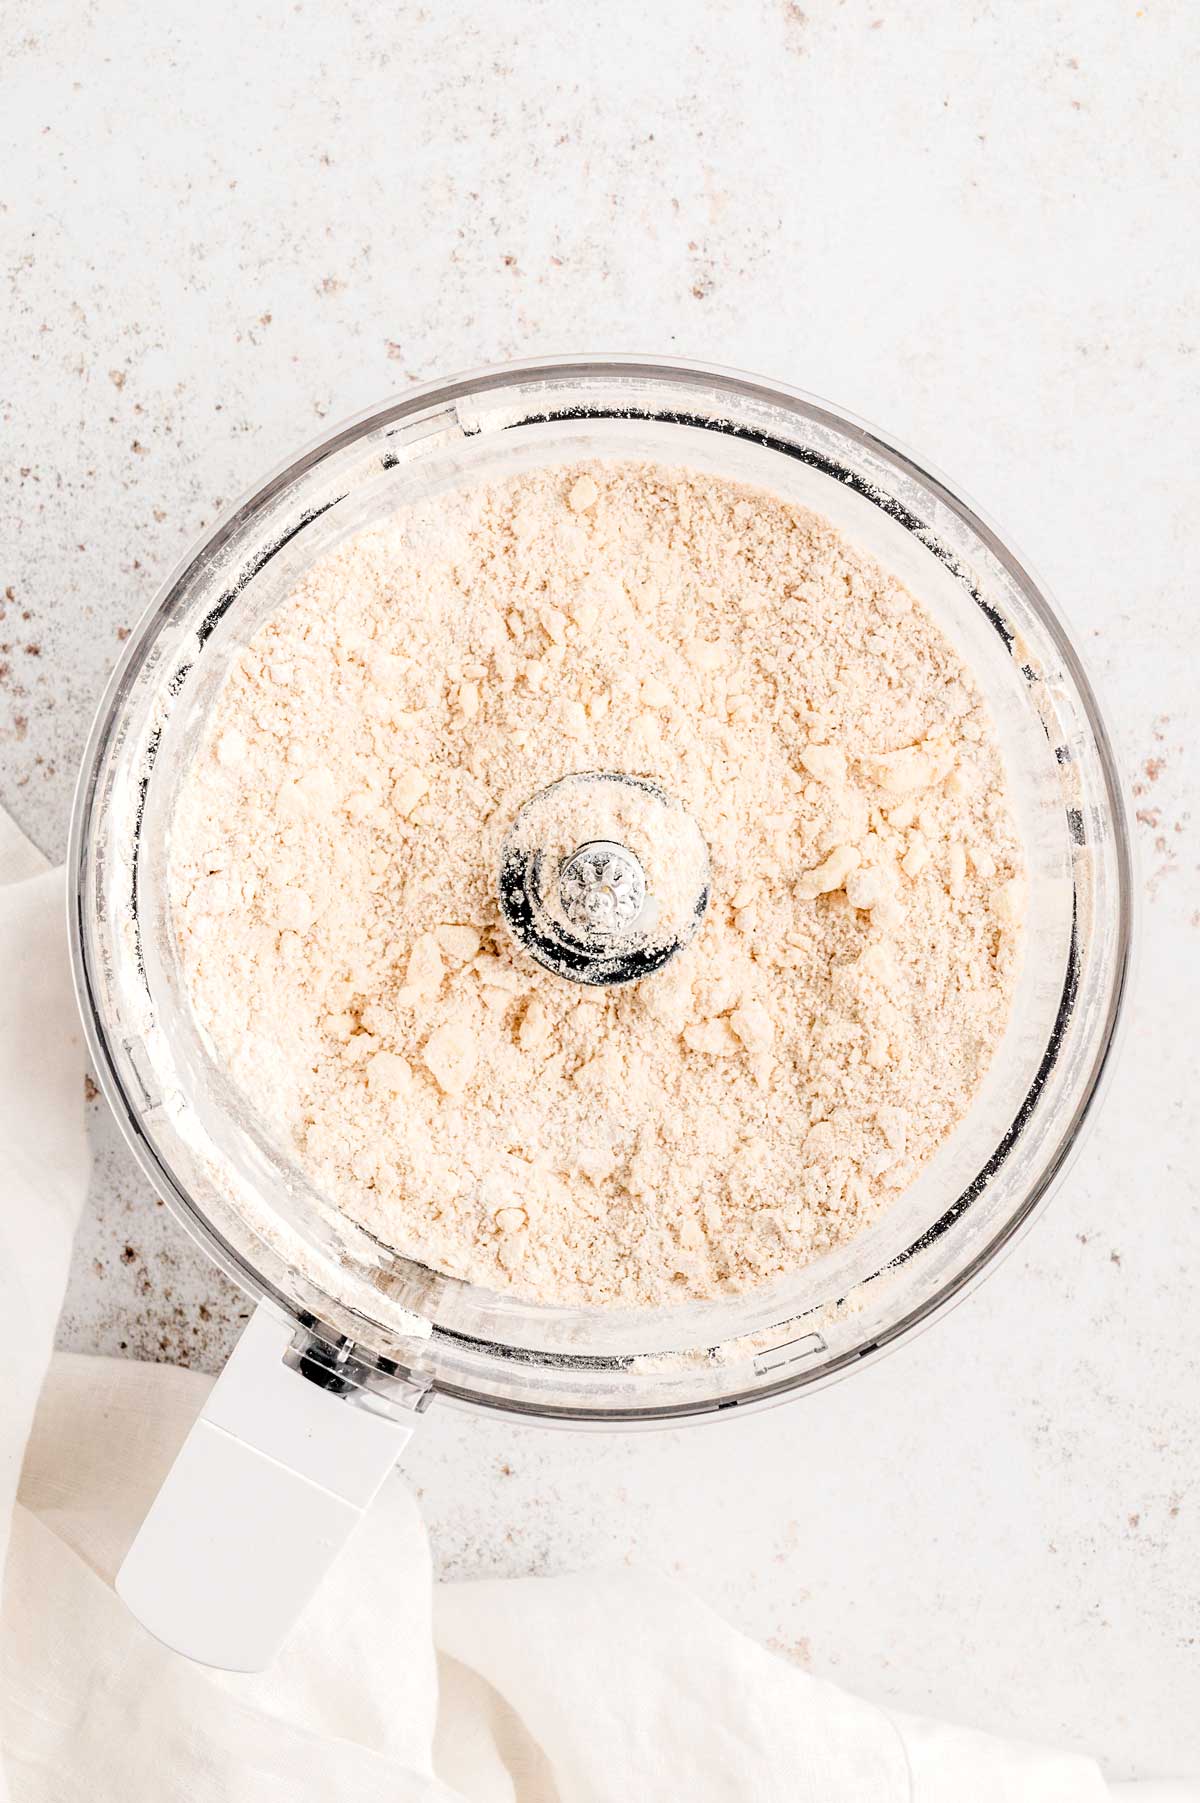 Butter and flour blended in a food processor to make dough.